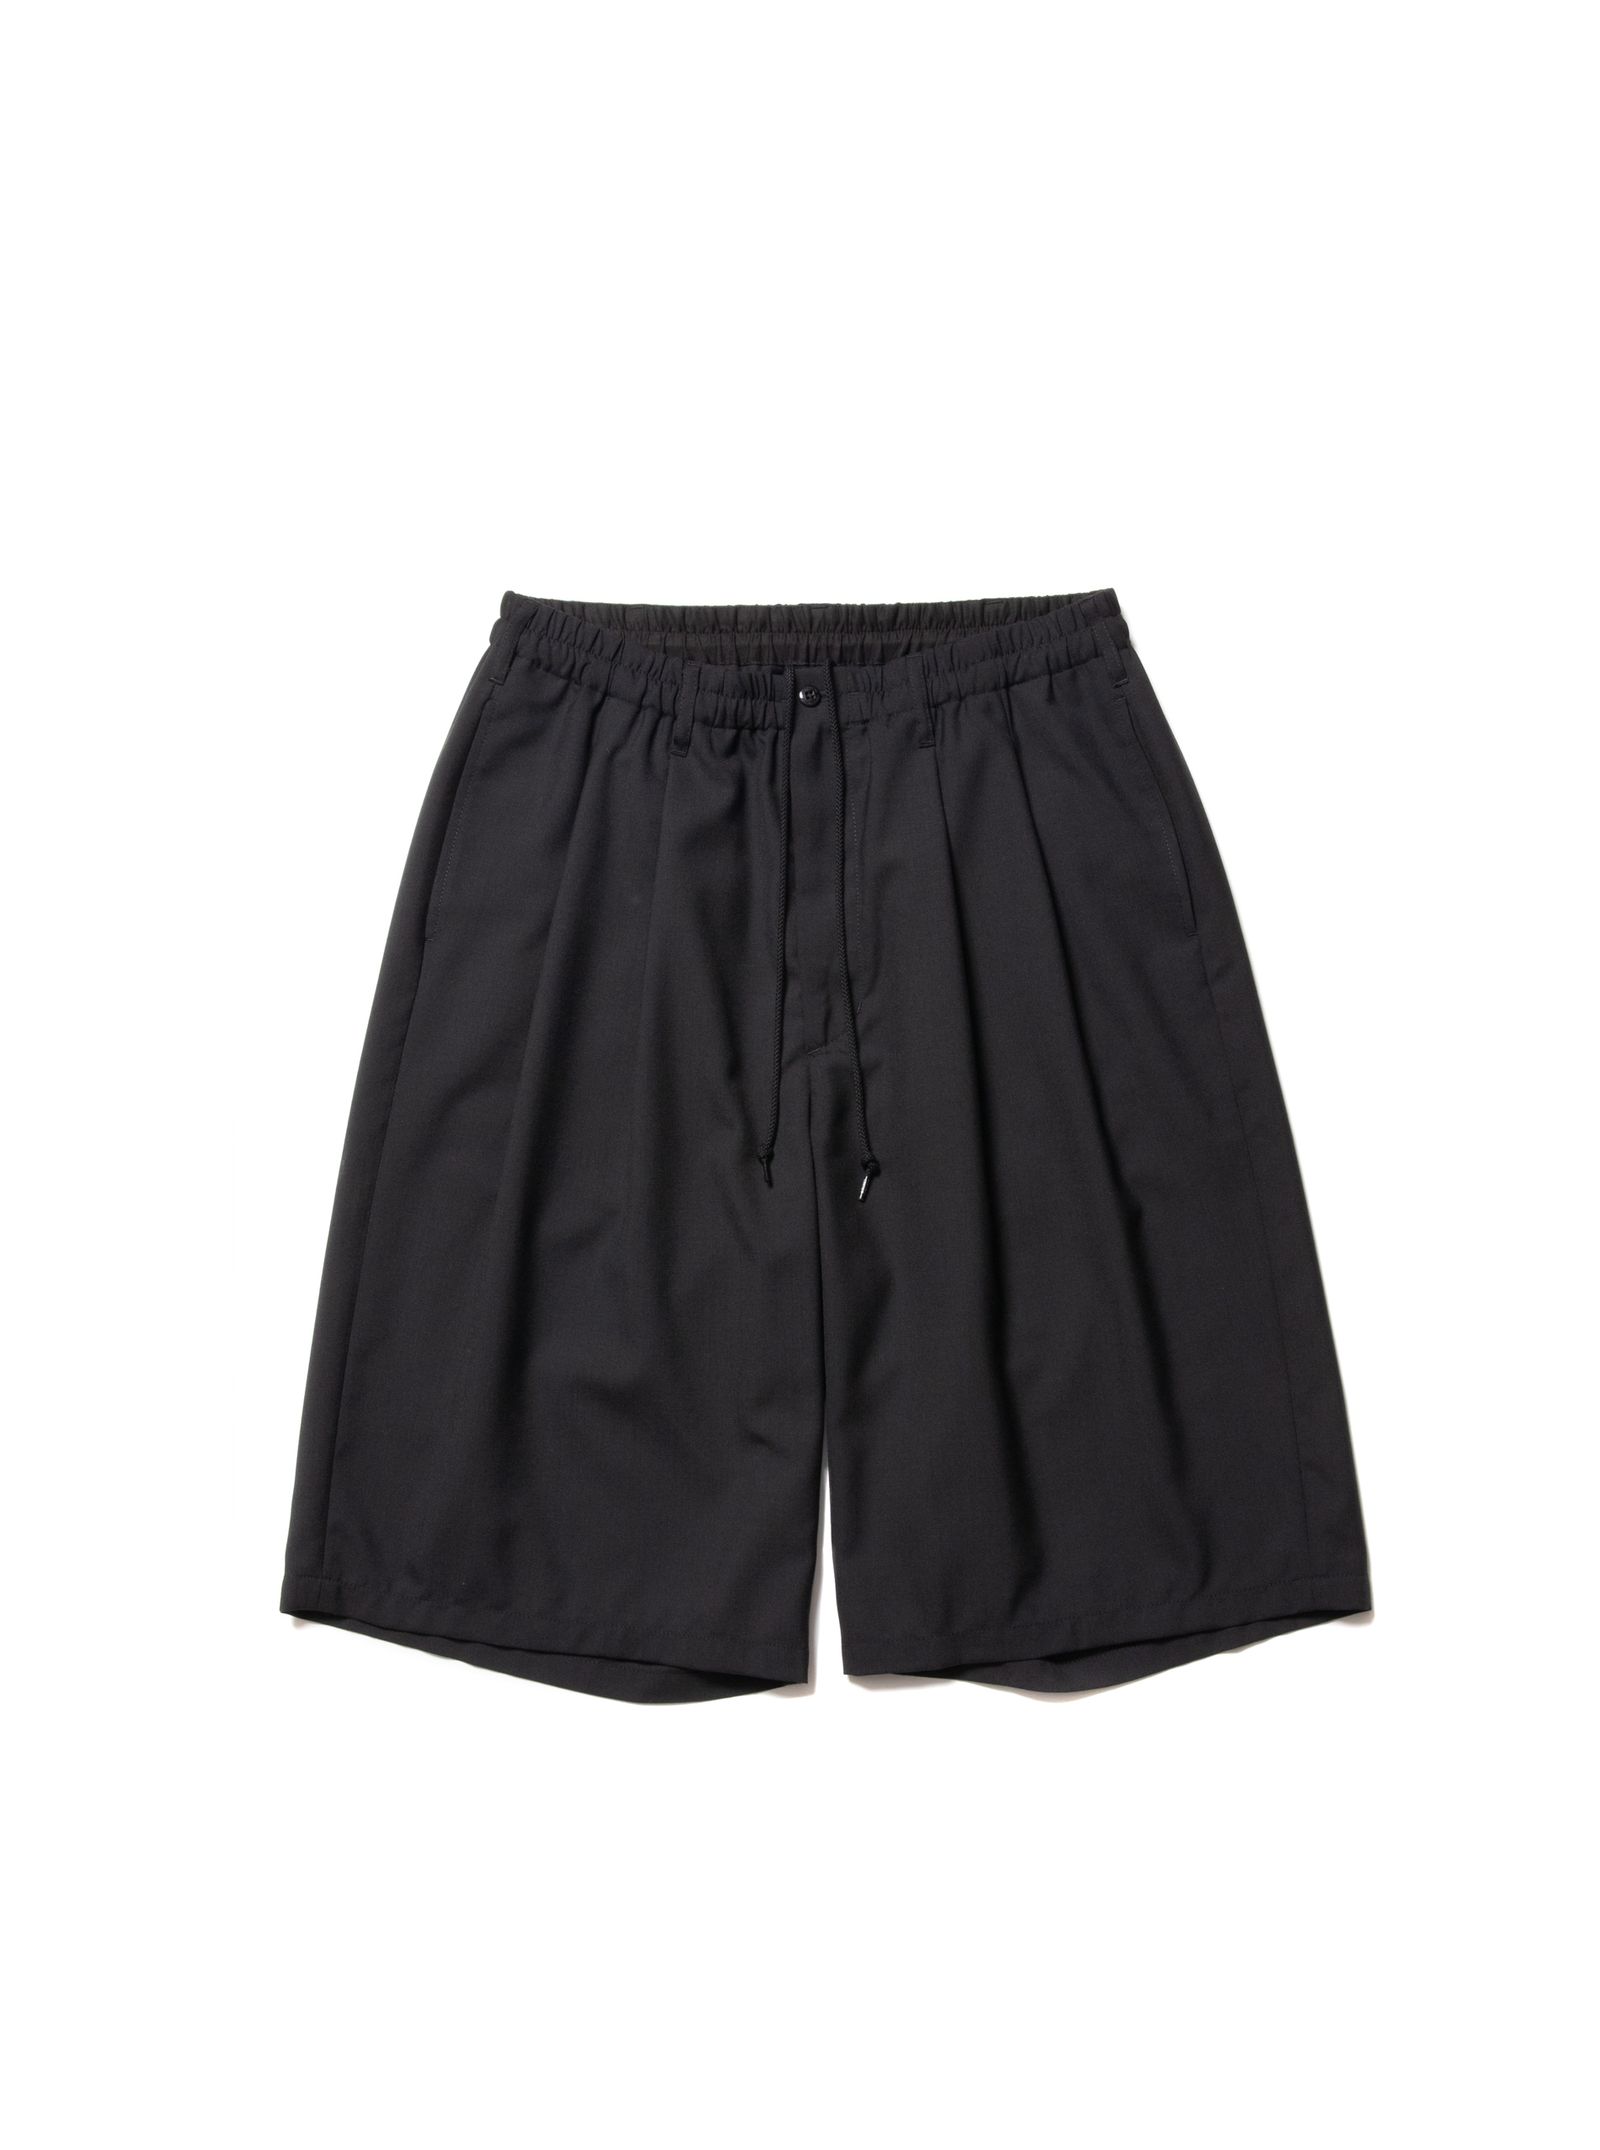 COOTIE PRODUCTIONS   T/W 2 Tuck Easy Shorts BLACK / ポリウール